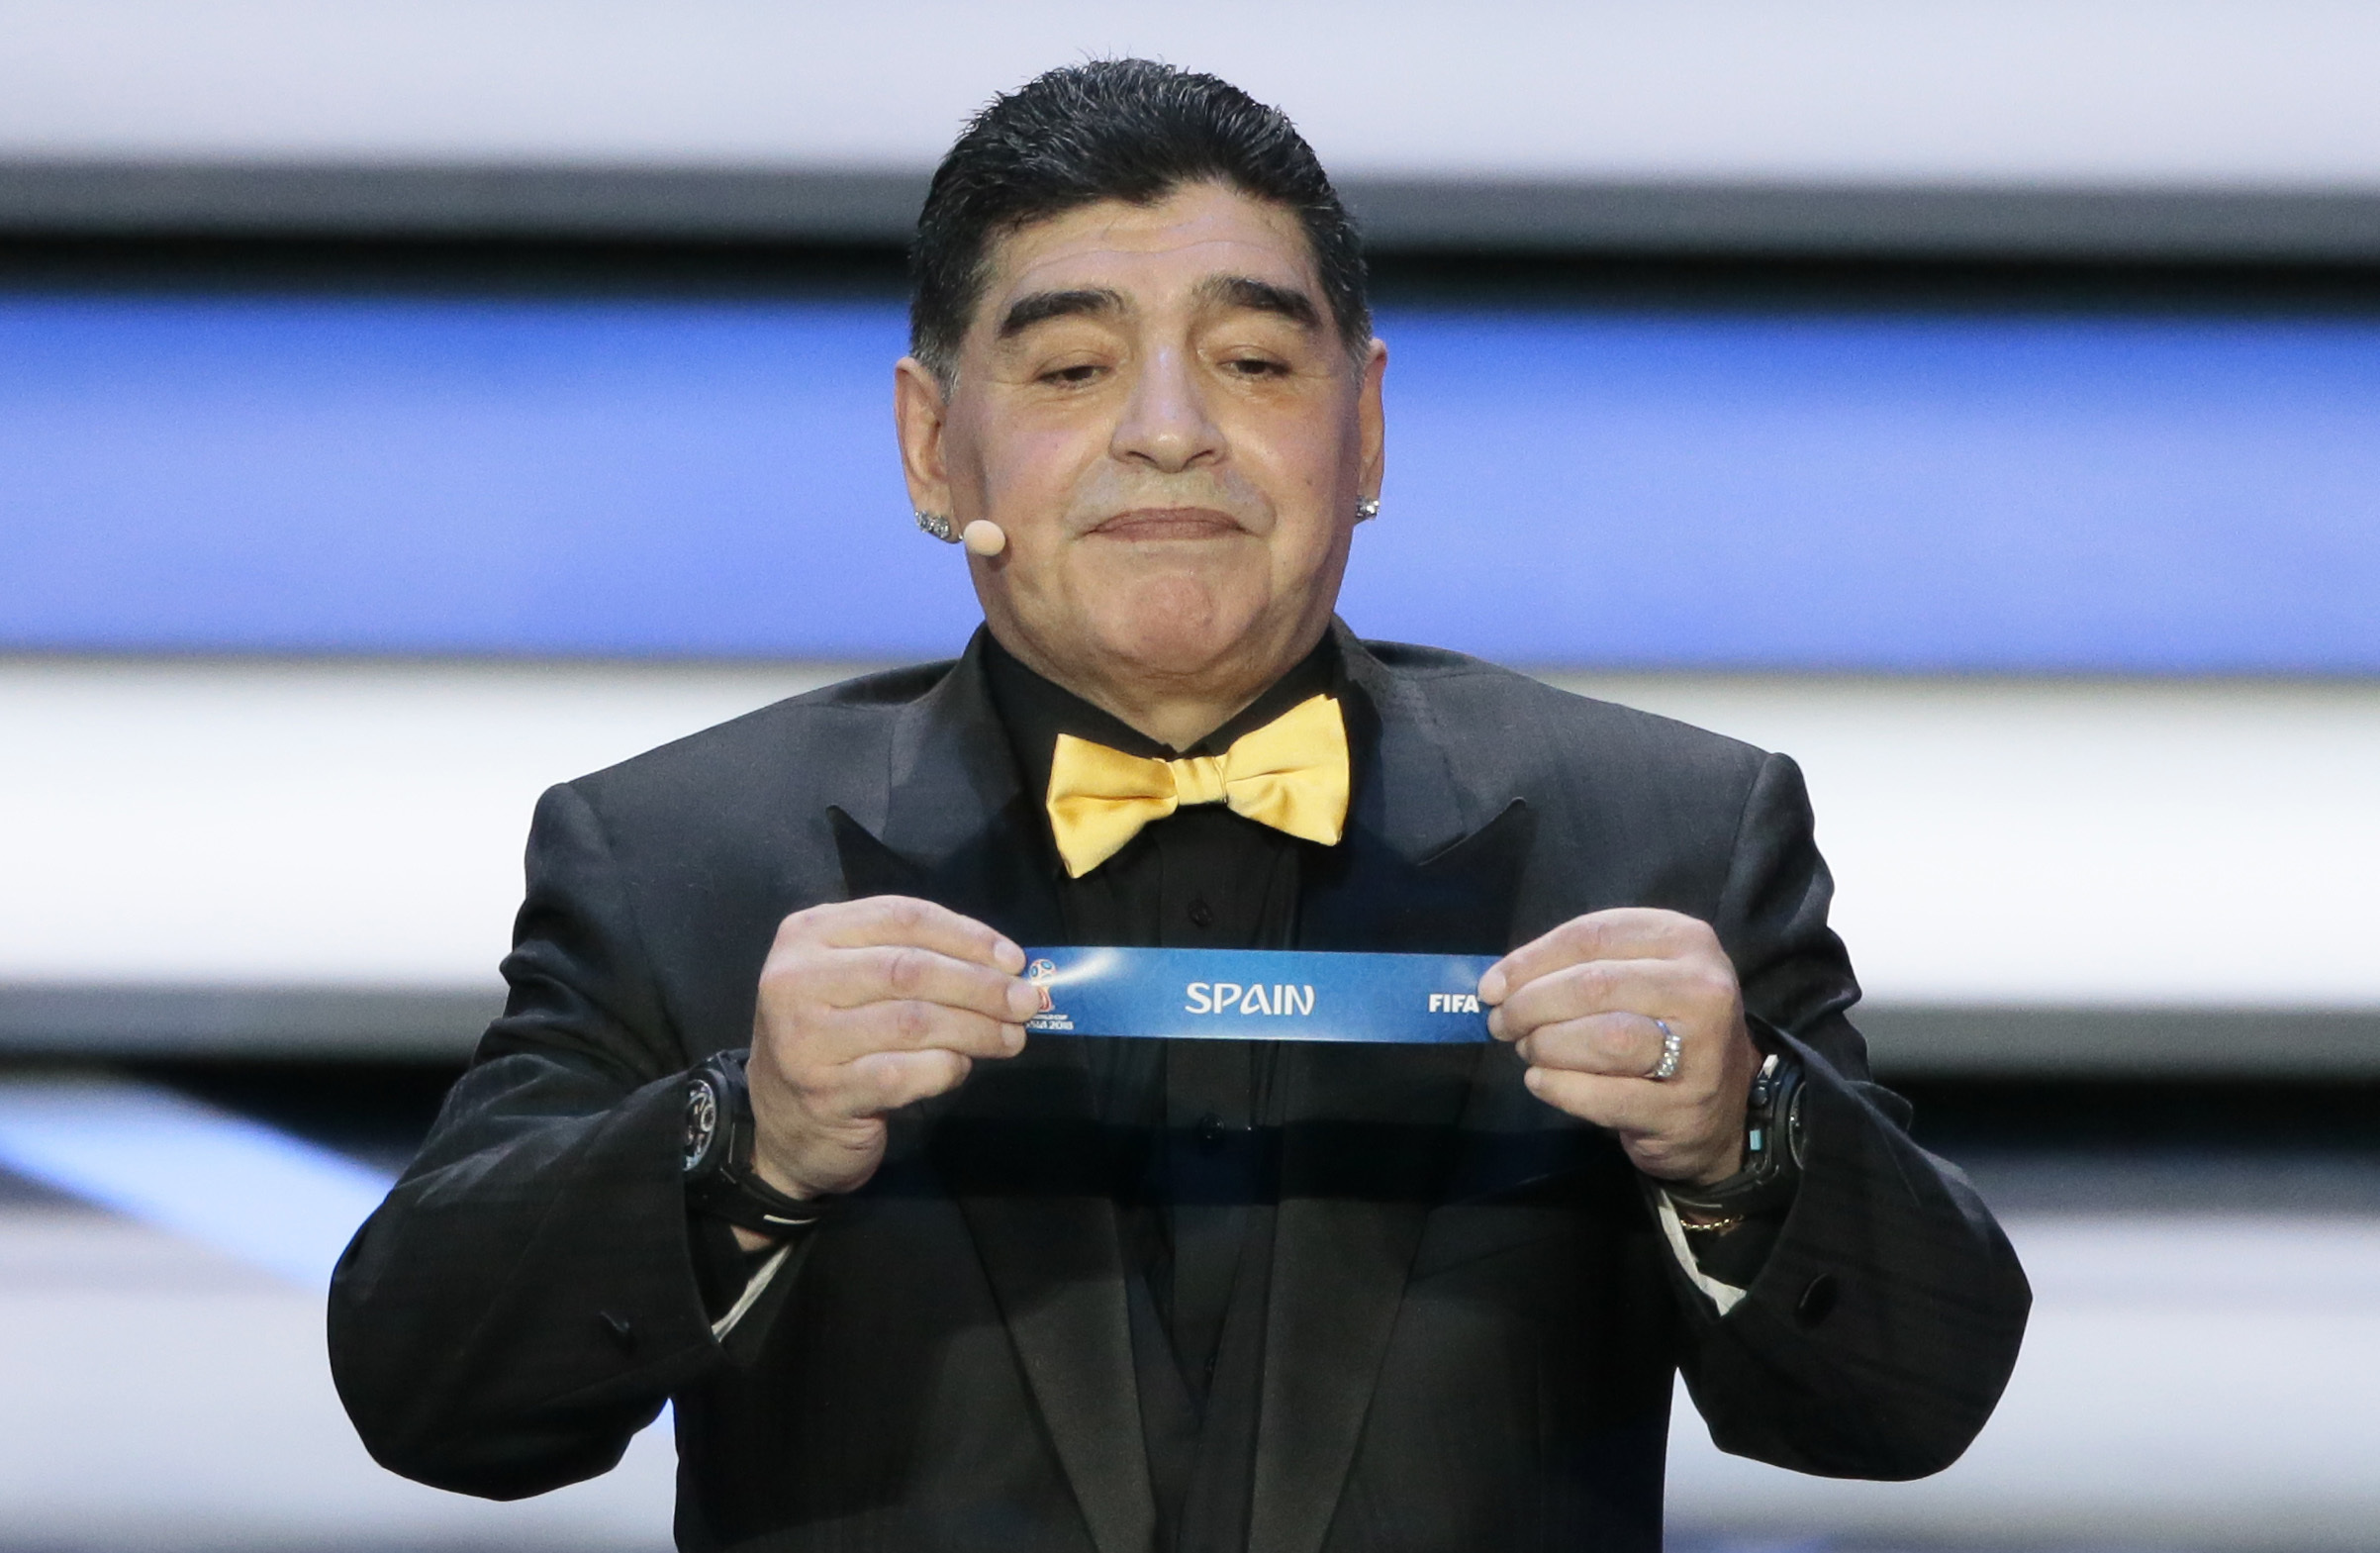 Argentine soccer legend Diego Maradona holds up the team name of Spain at the 2018 soccer World Cup draw in the Kremlin in Moscow, Friday, Dec. 1, 2017.